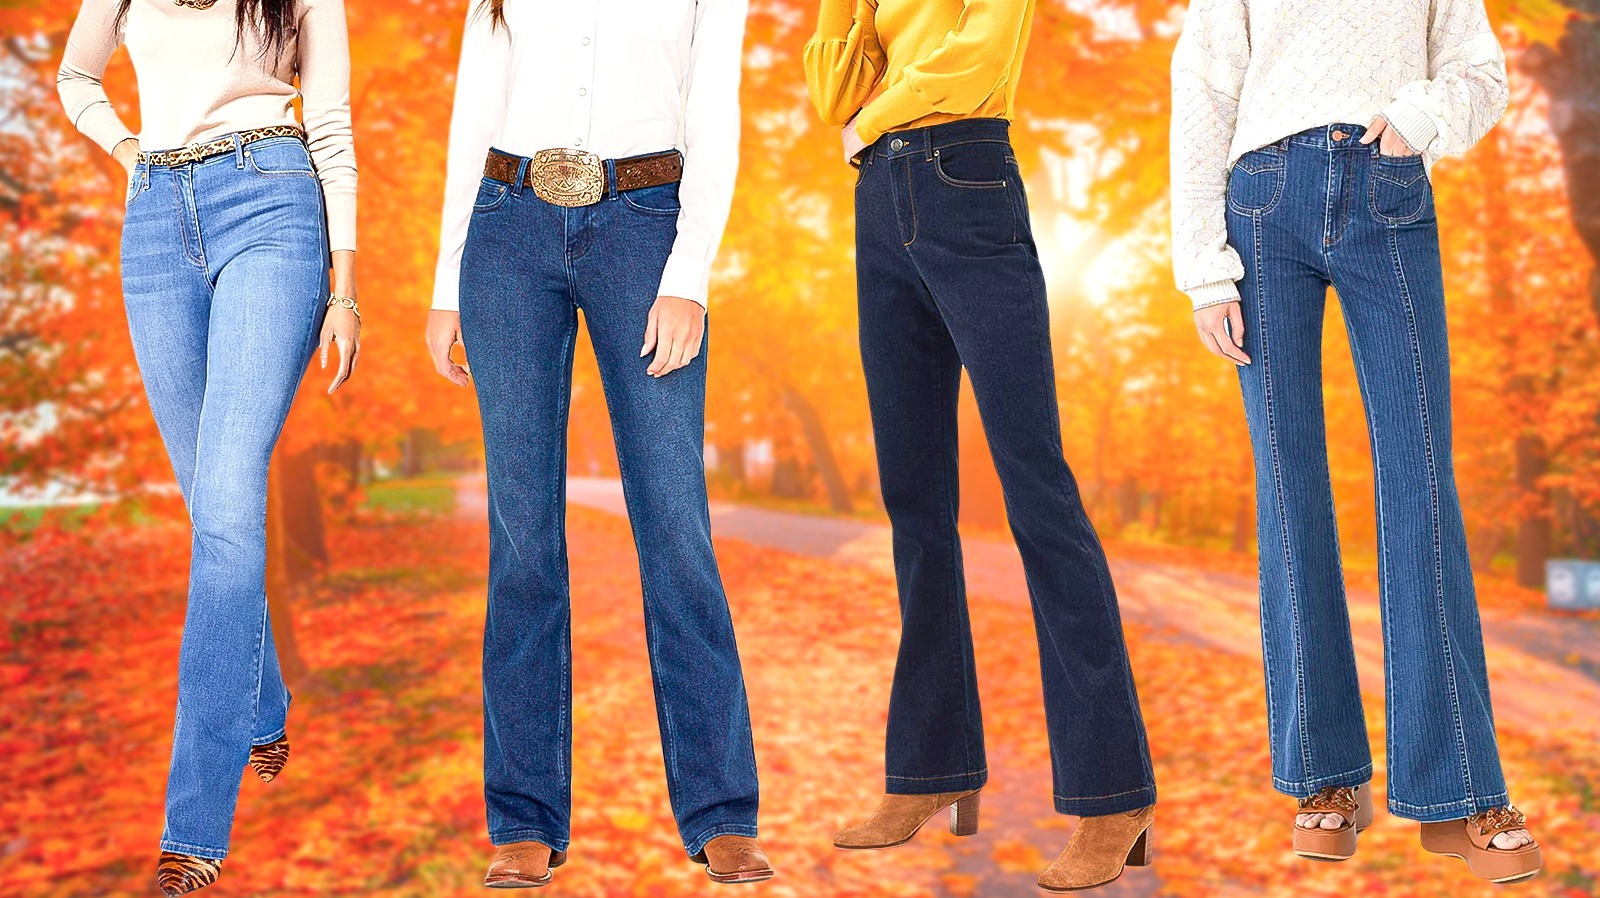 Boot-Cut Jeans Are Unexpectedly Timeless - How To Style Them For